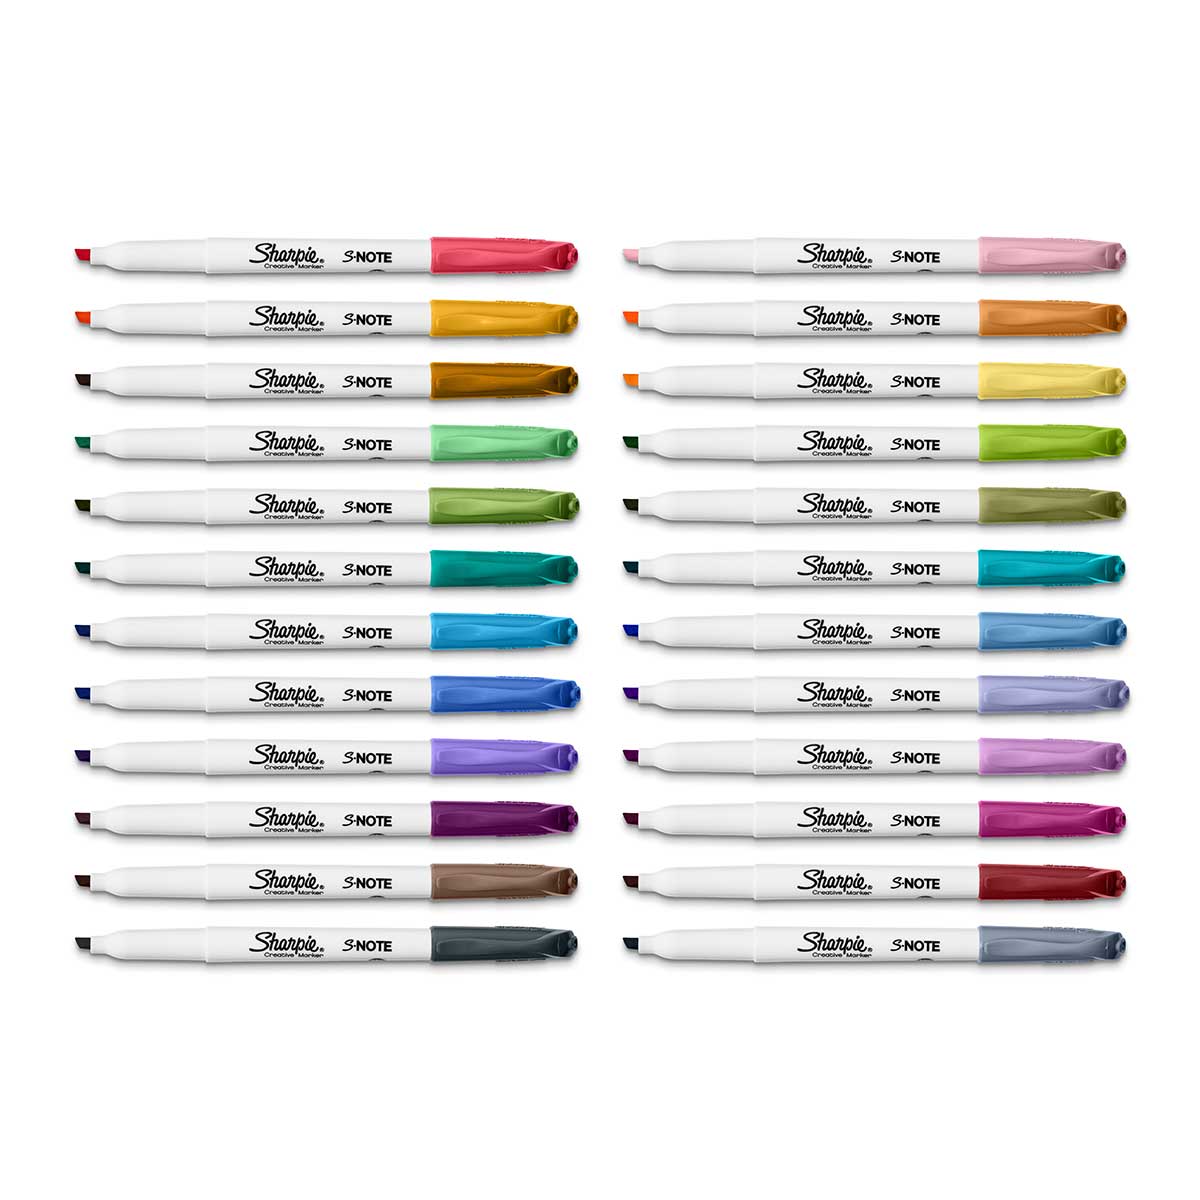 Sharpie No Bleed S-Note Creative Markers Assorted Colors 24 Ct for Highlighting, Drawing, and Notes